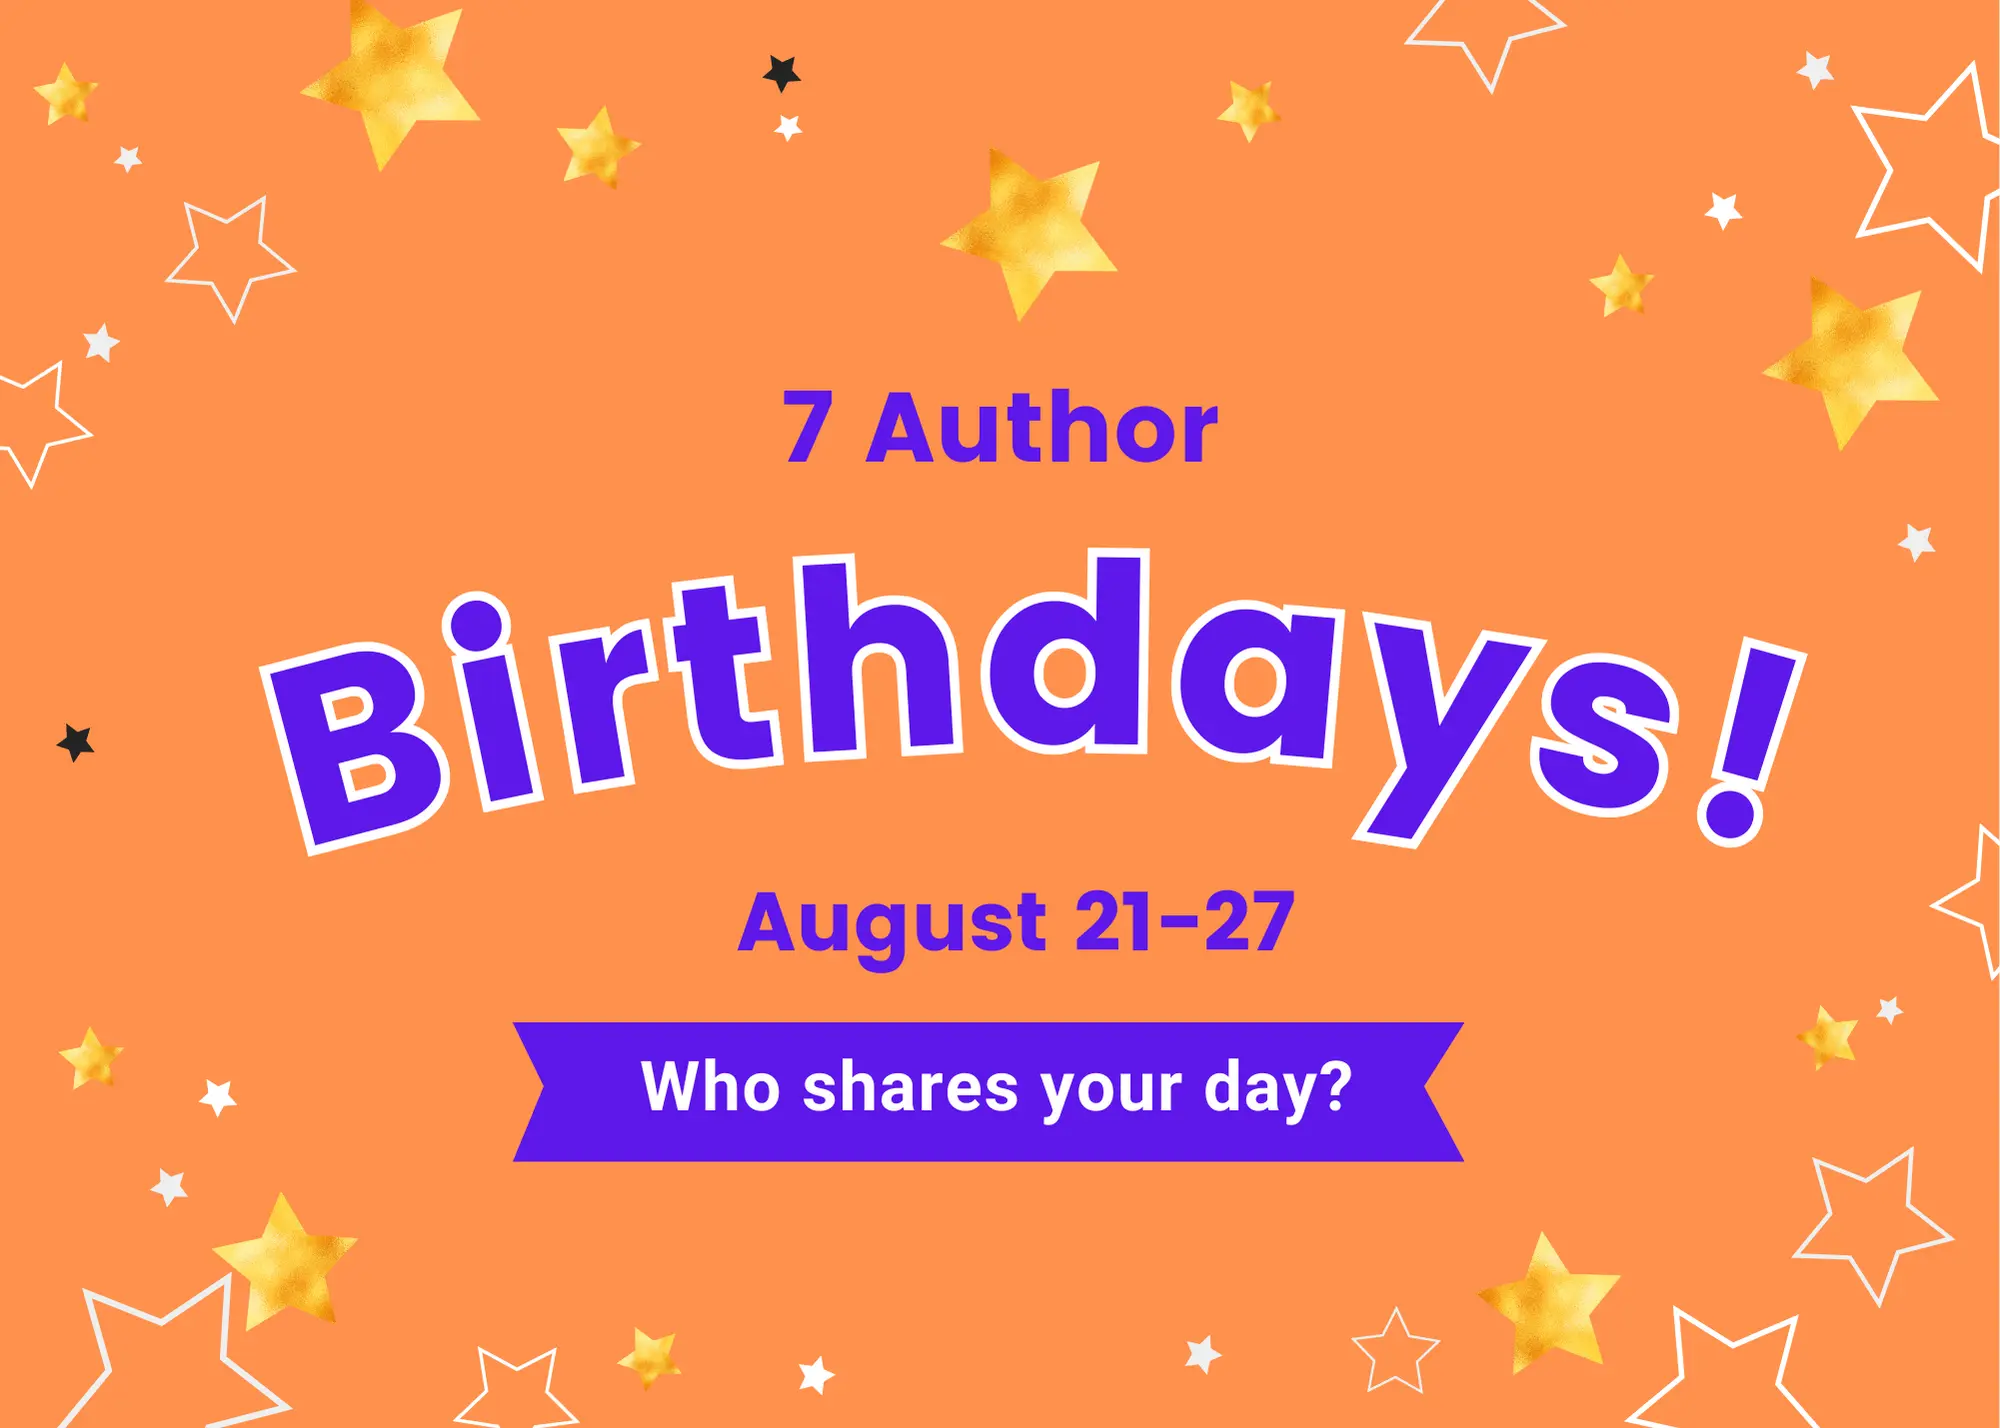 author birthdays who shares your day